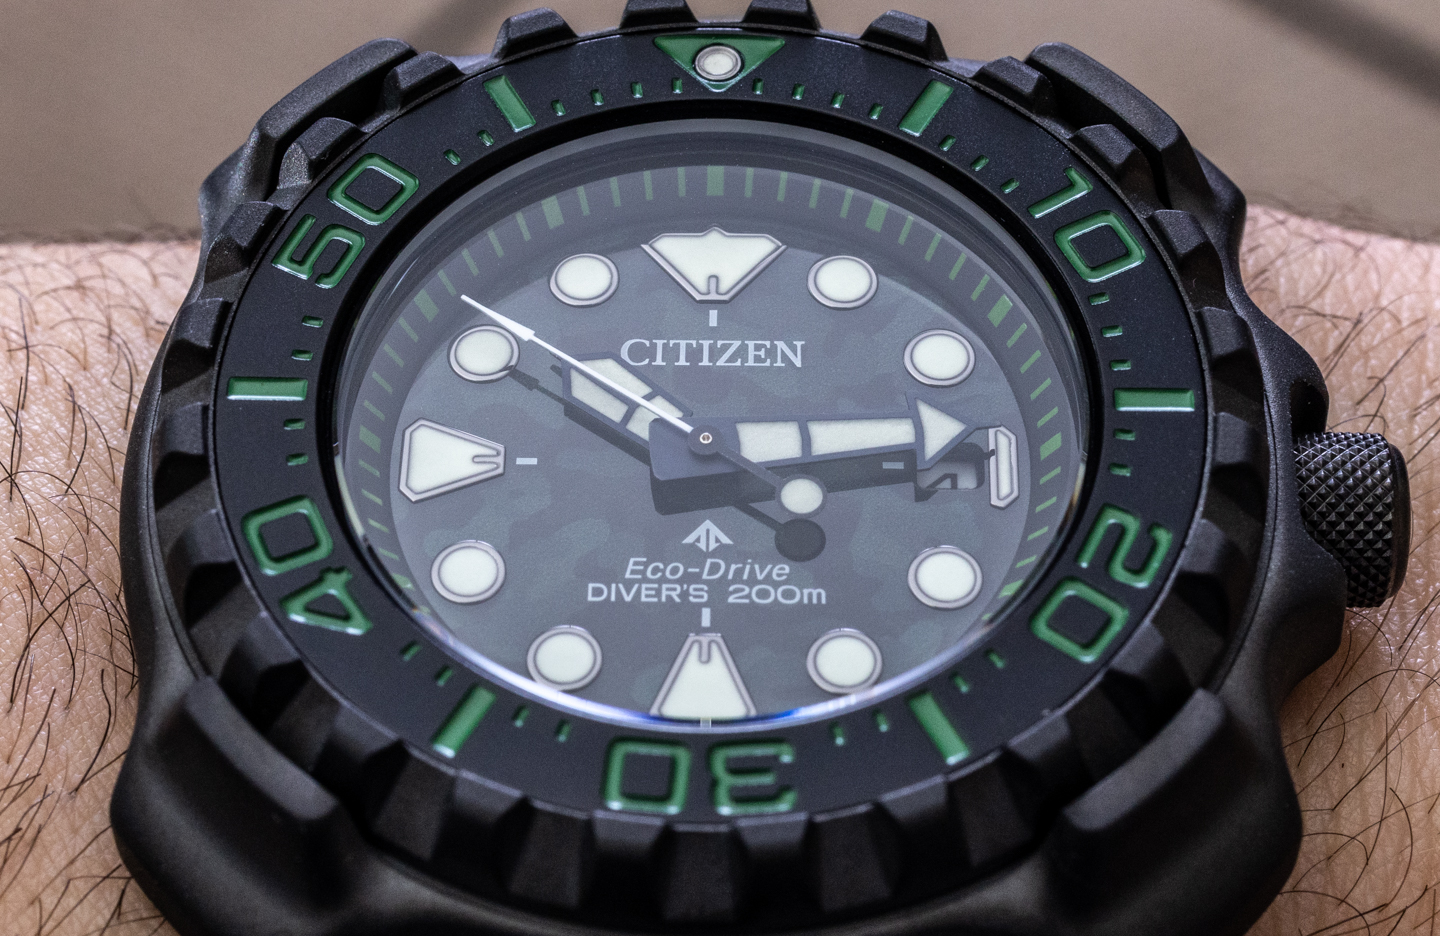 Citizen Promaster Diver Review: Is this Eco-Drive Diver Right For You?